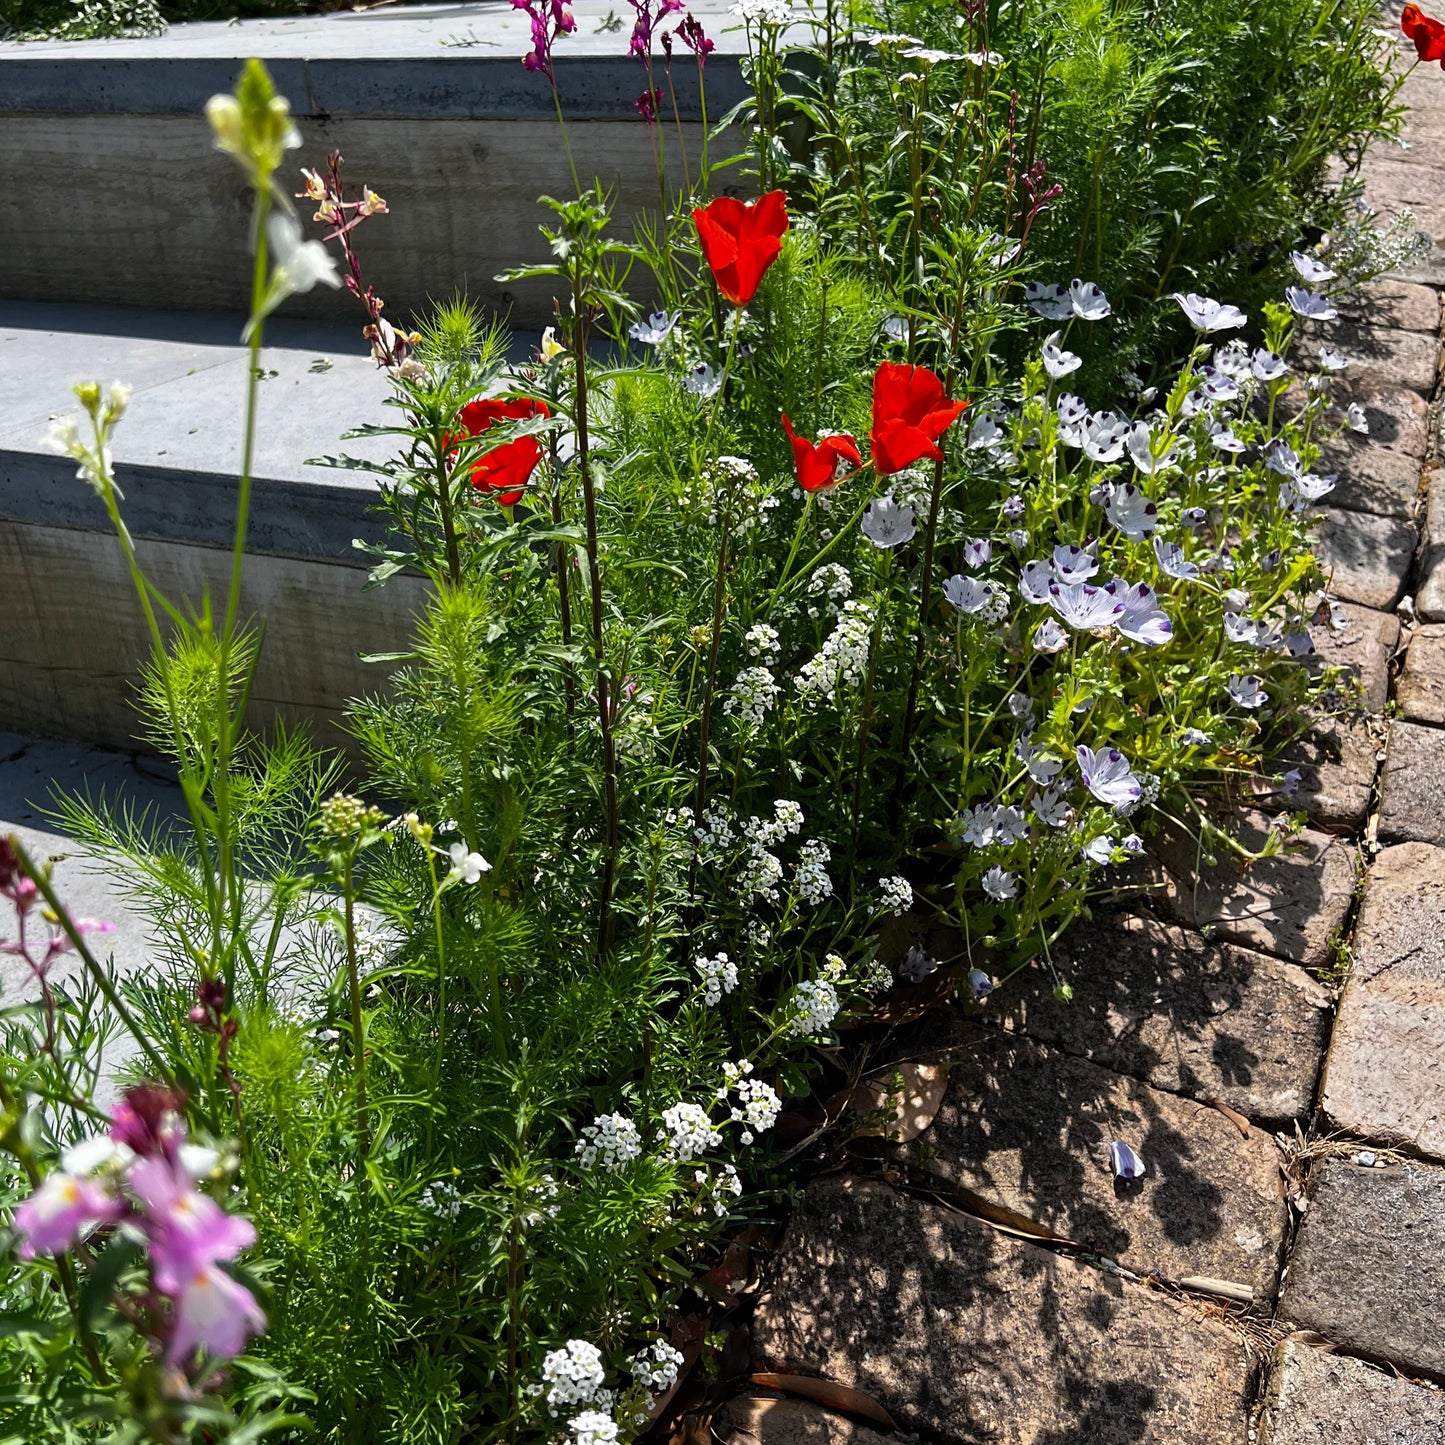 A close-up view of wildflowers planted alongside some steps surrounded by lush green grass.